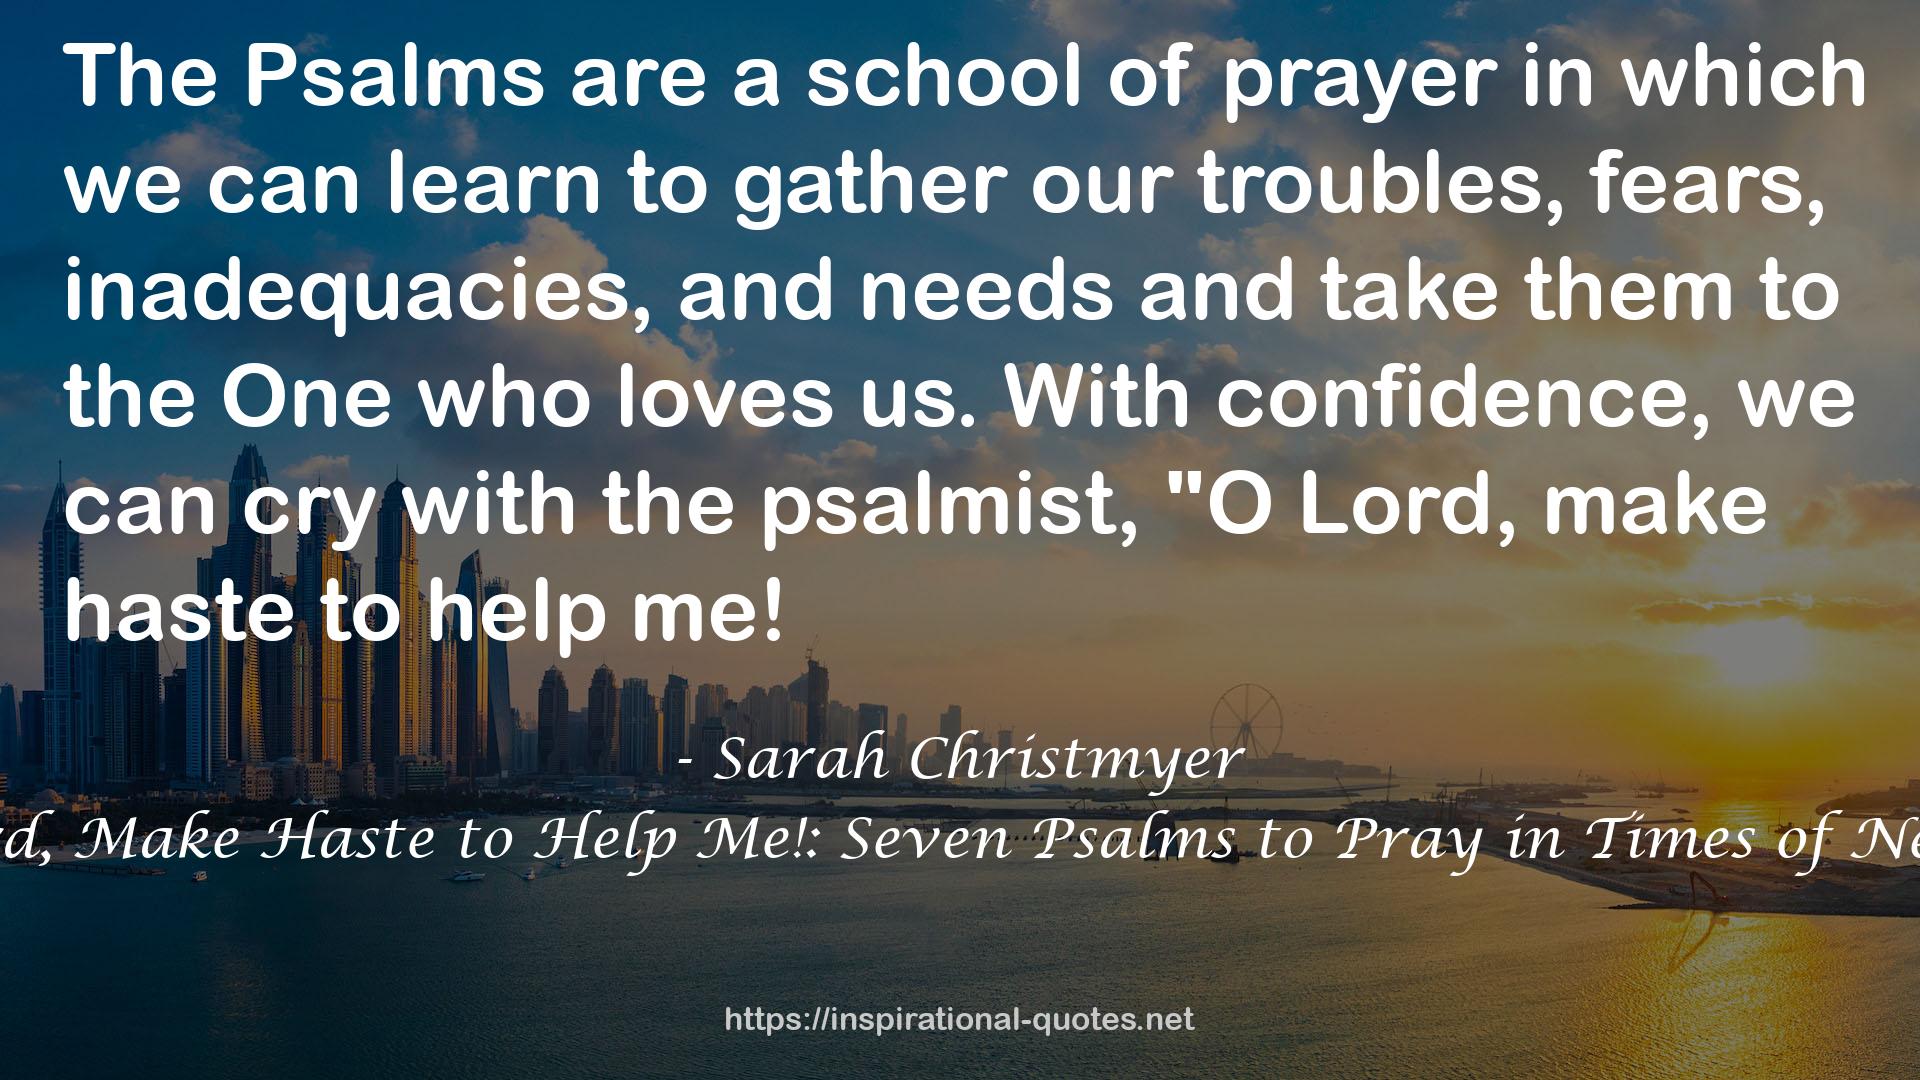 Lord, Make Haste to Help Me!: Seven Psalms to Pray in Times of Need QUOTES